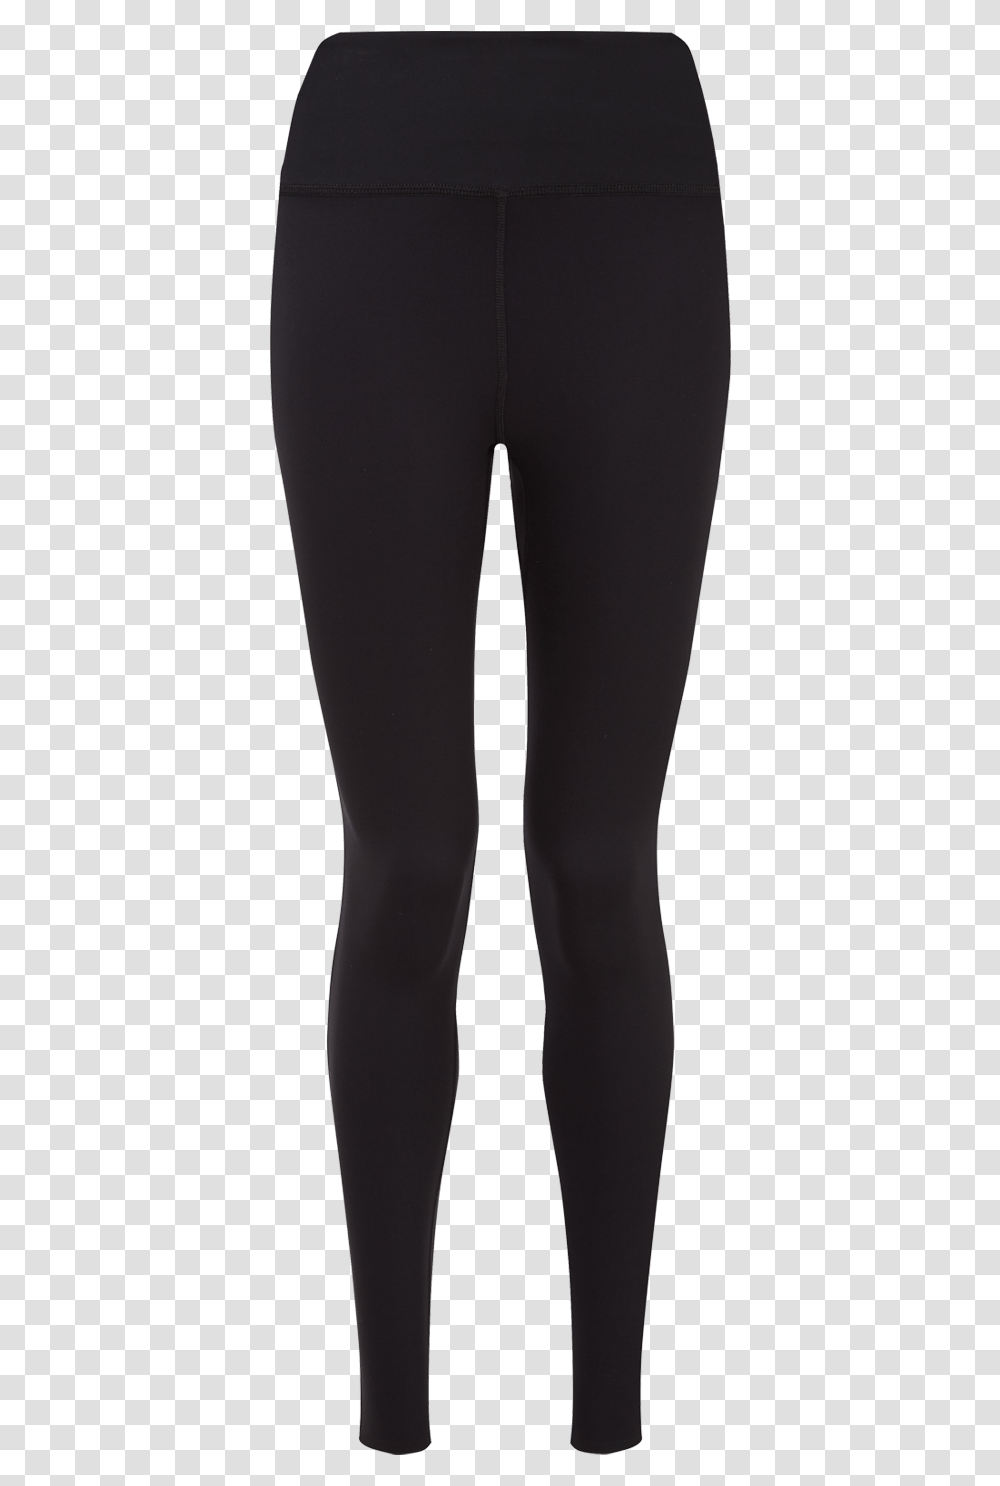 Trousers, Pants, Apparel, Tights Transparent Png